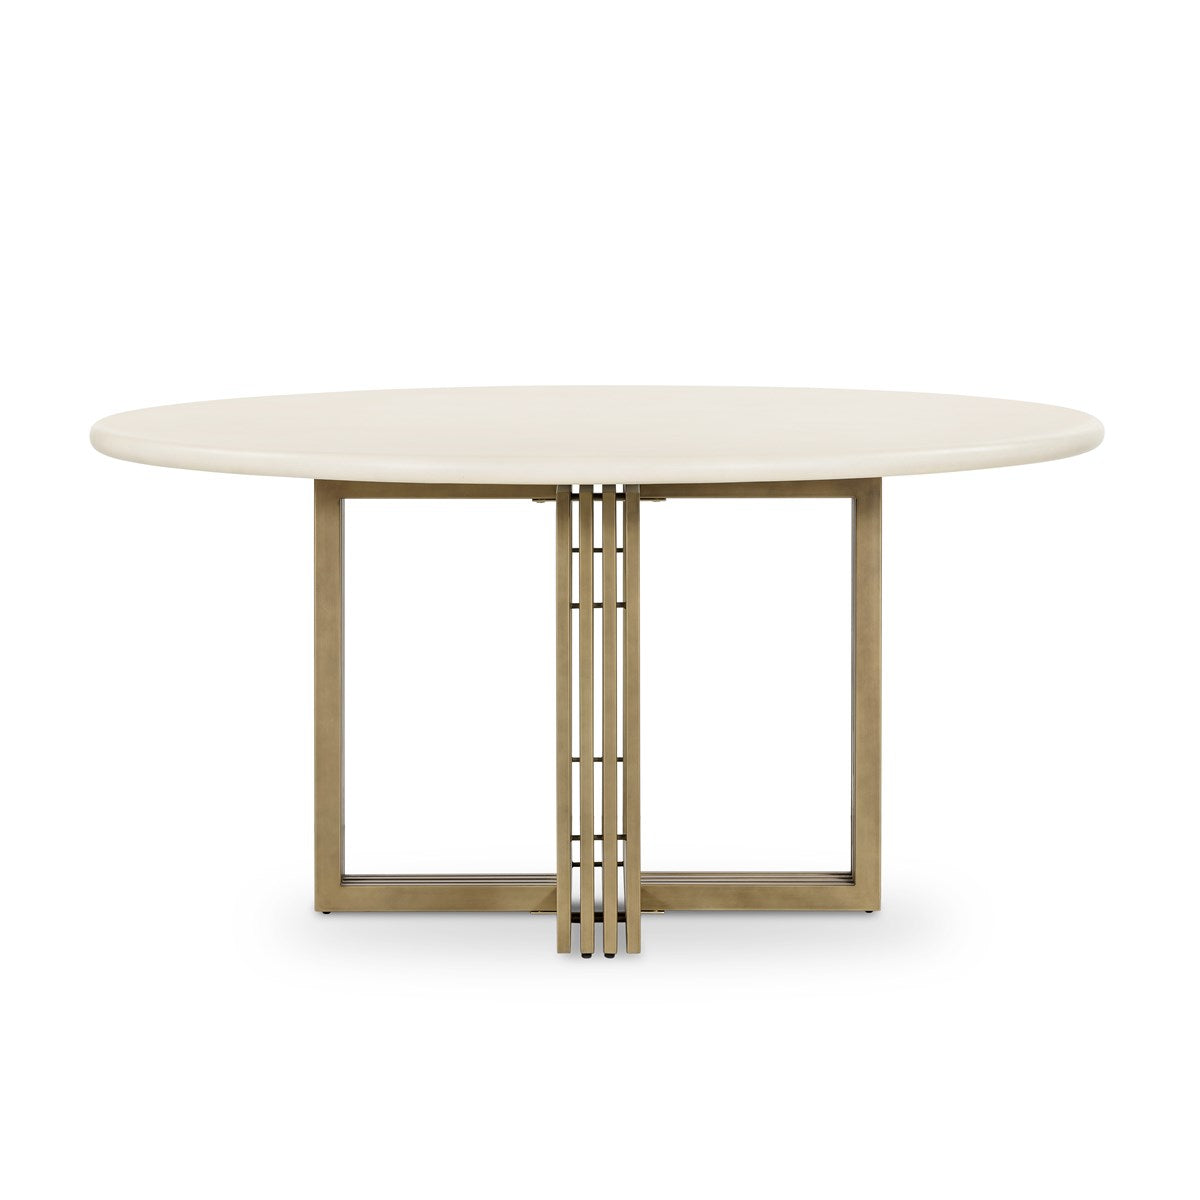 Load image into Gallery viewer, Mia Round Dining Table-Parchment White Dining Table Four Hands     Four Hands, Burke Decor, Mid Century Modern Furniture, Old Bones Furniture Company, Old Bones Co, Modern Mid Century, Designer Furniture, https://www.oldbonesco.com/
